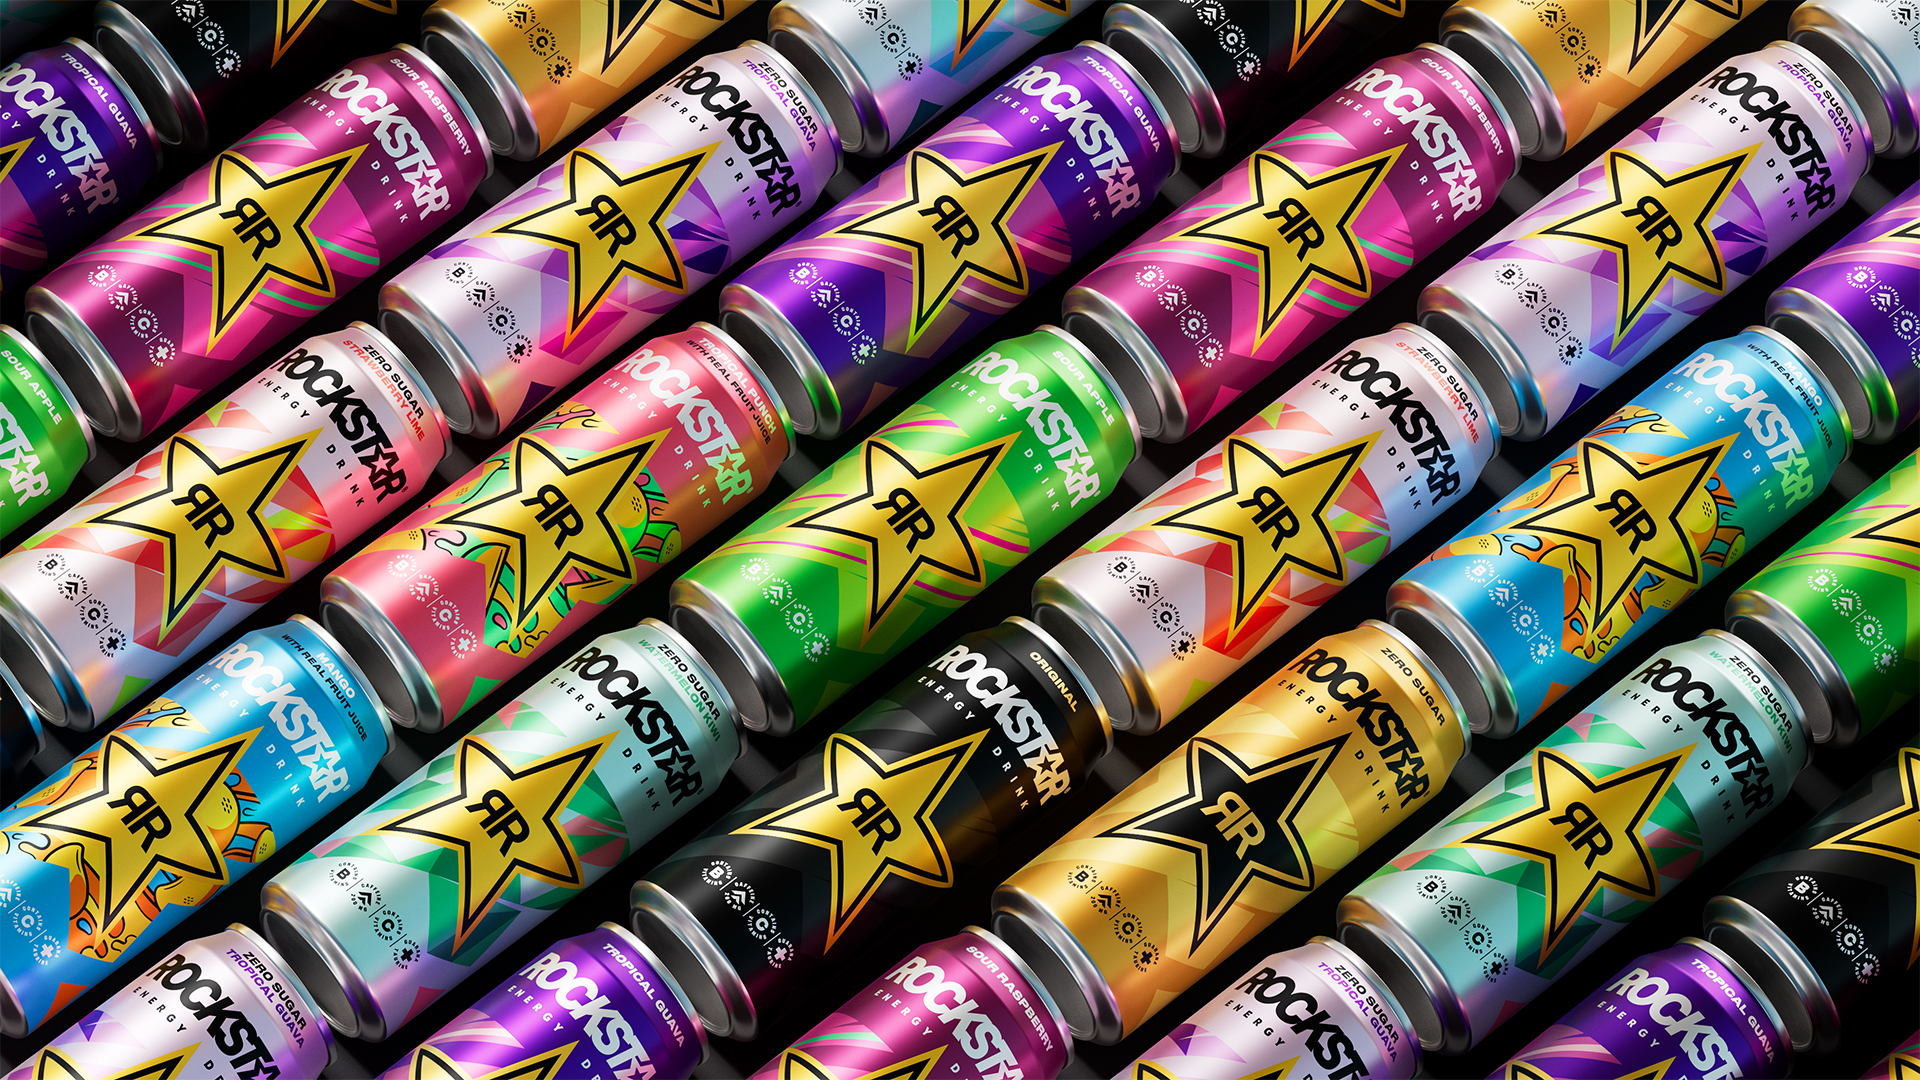 Rockstar Energy Gets a Punchy Makeover Straight Out of an Early 2000s Blockbuster